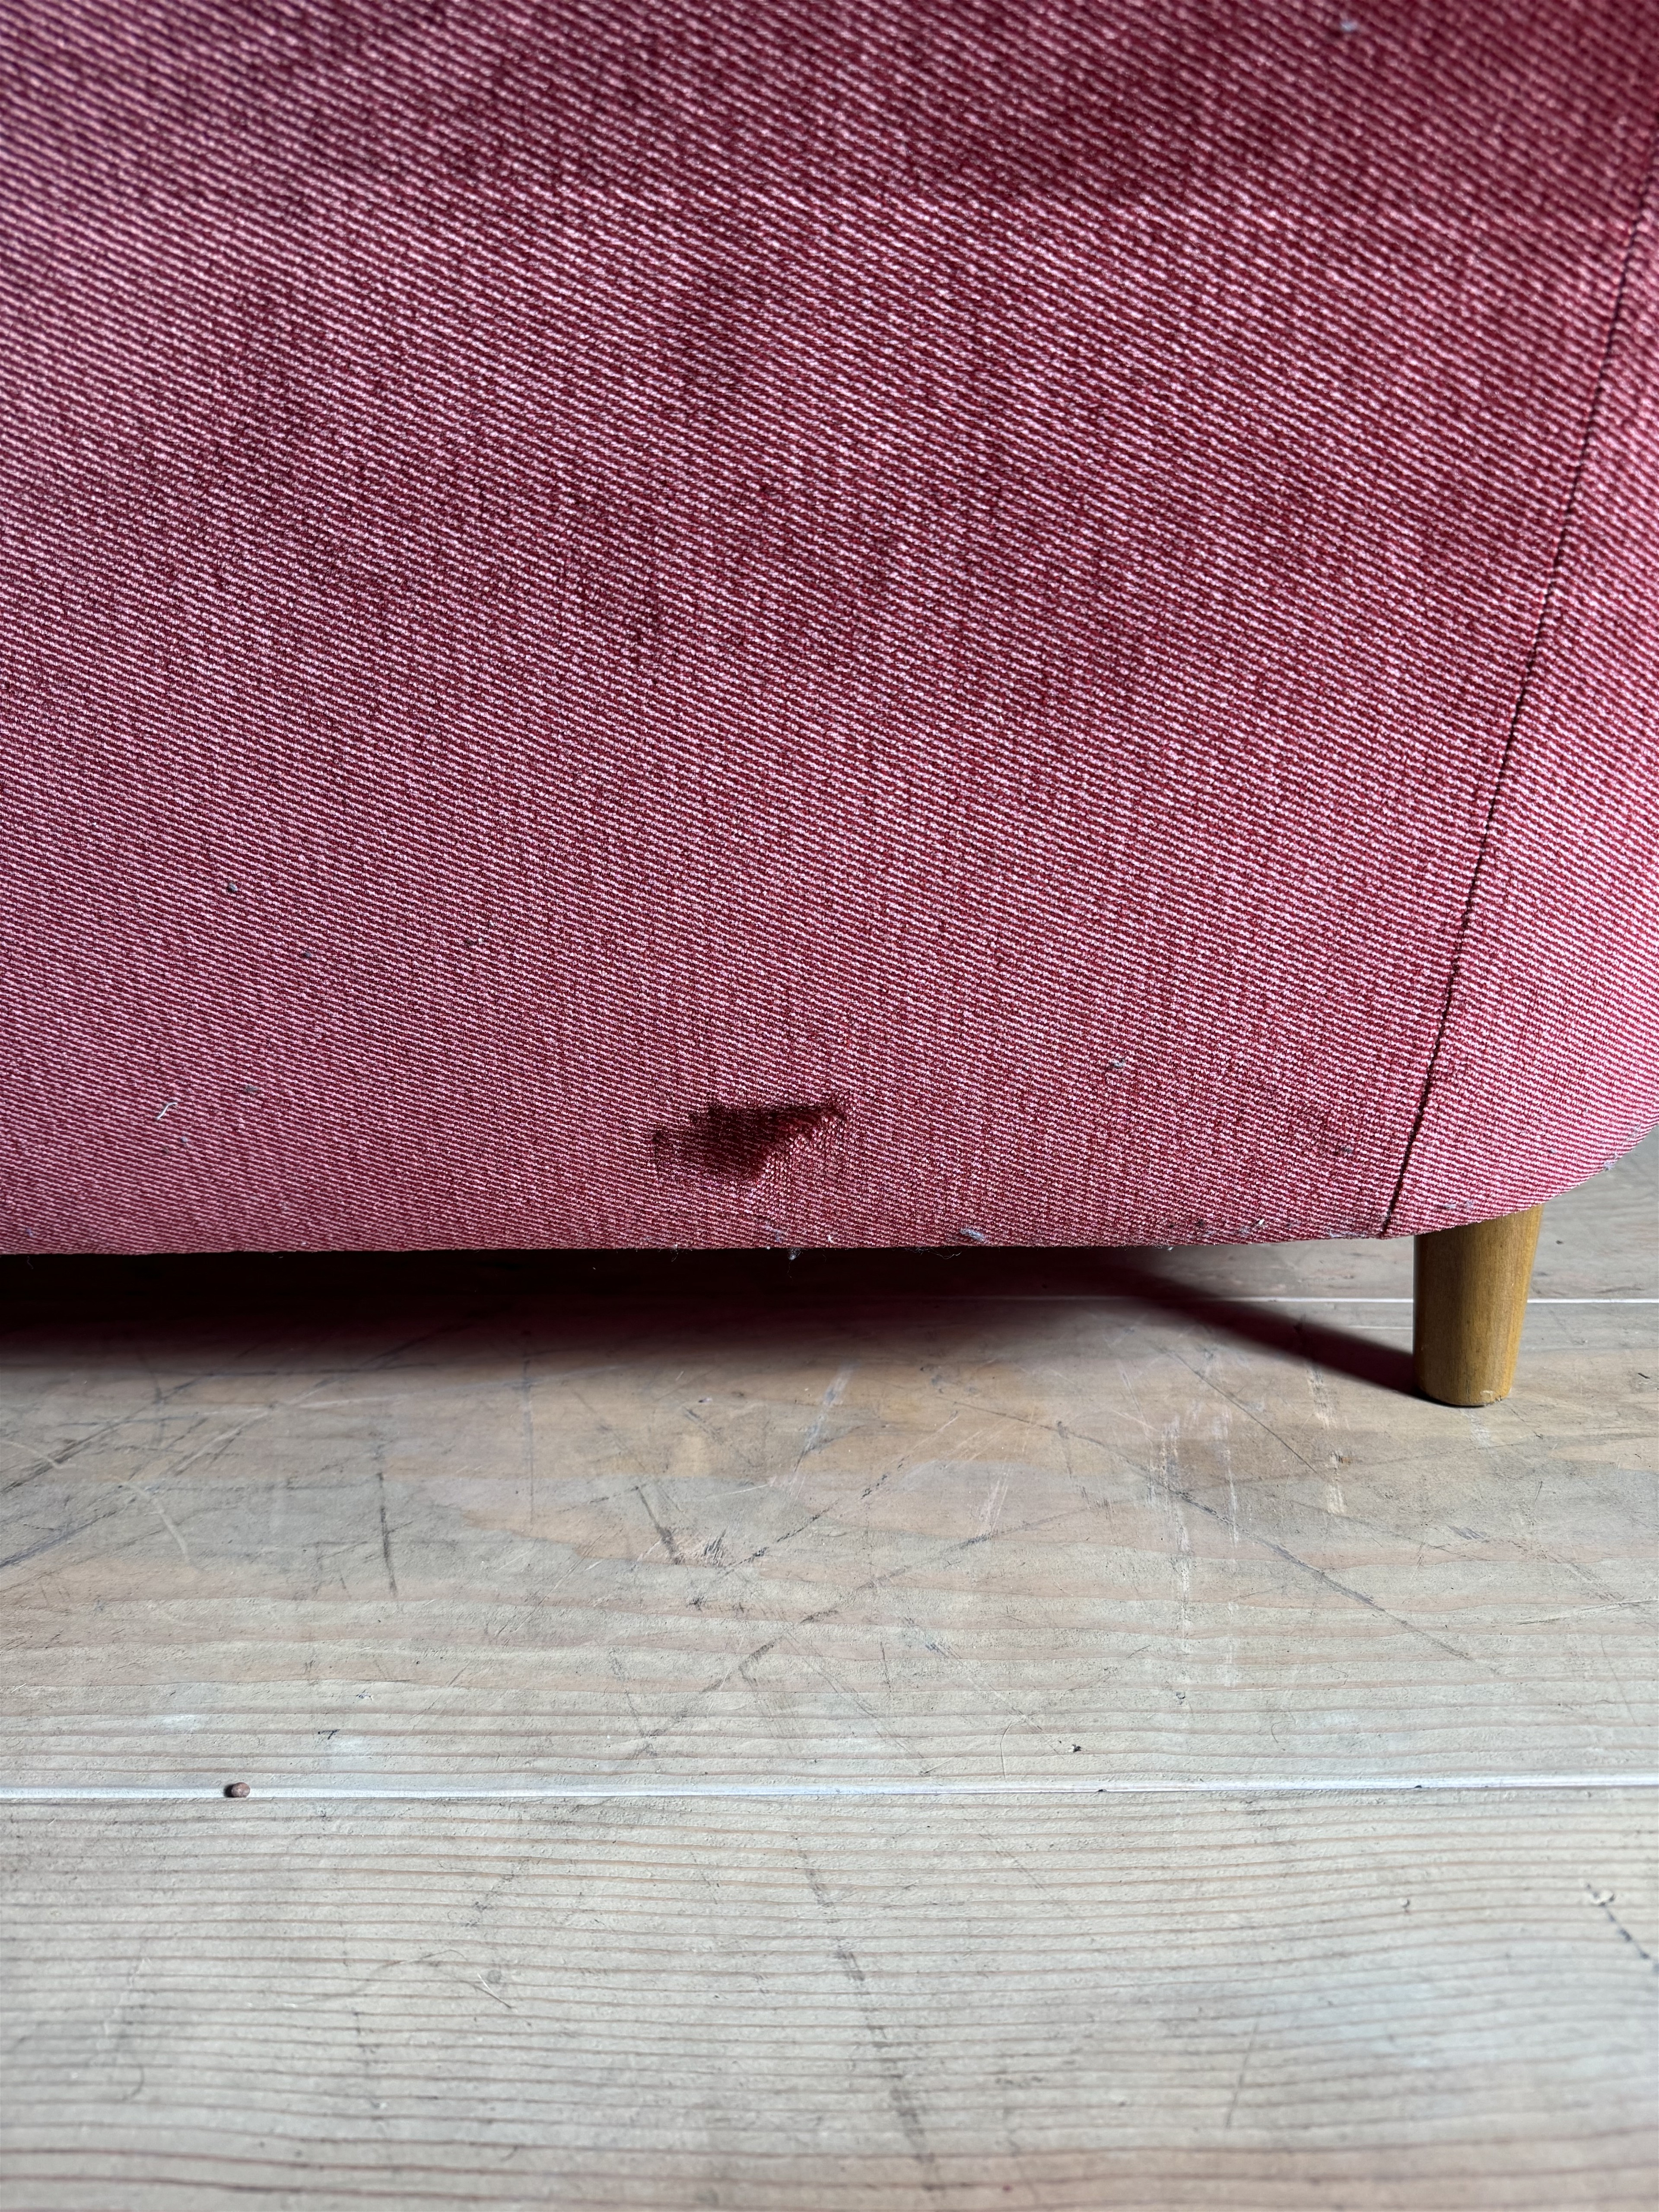 a red couch sitting on top of a wooden floor